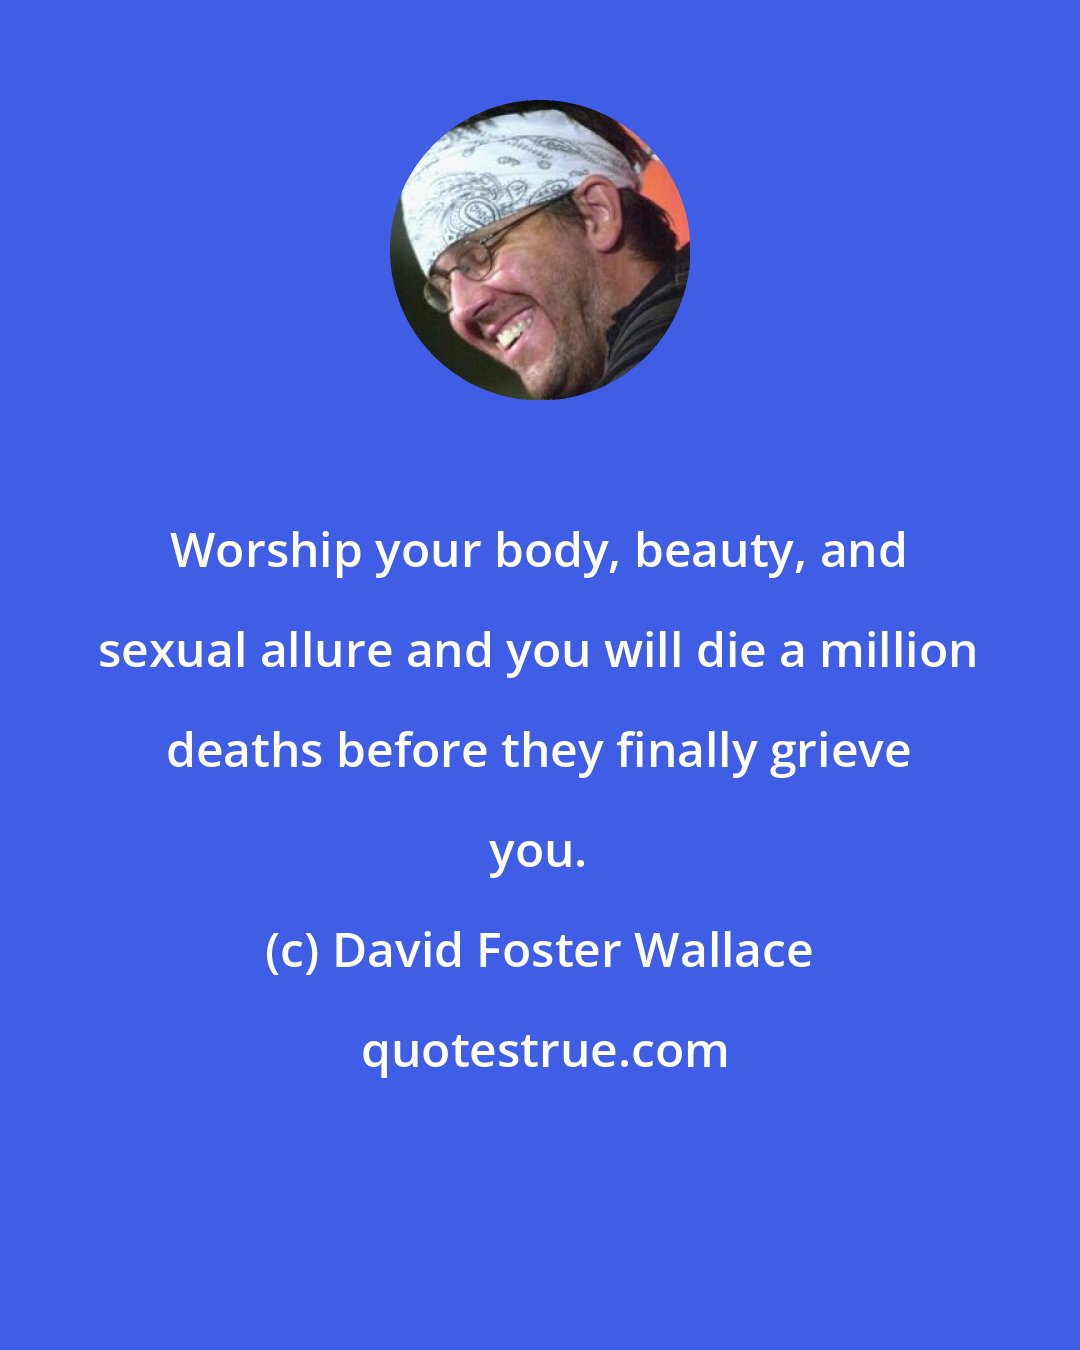 David Foster Wallace: Worship your body, beauty, and sexual allure and you will die a million deaths before they finally grieve you.